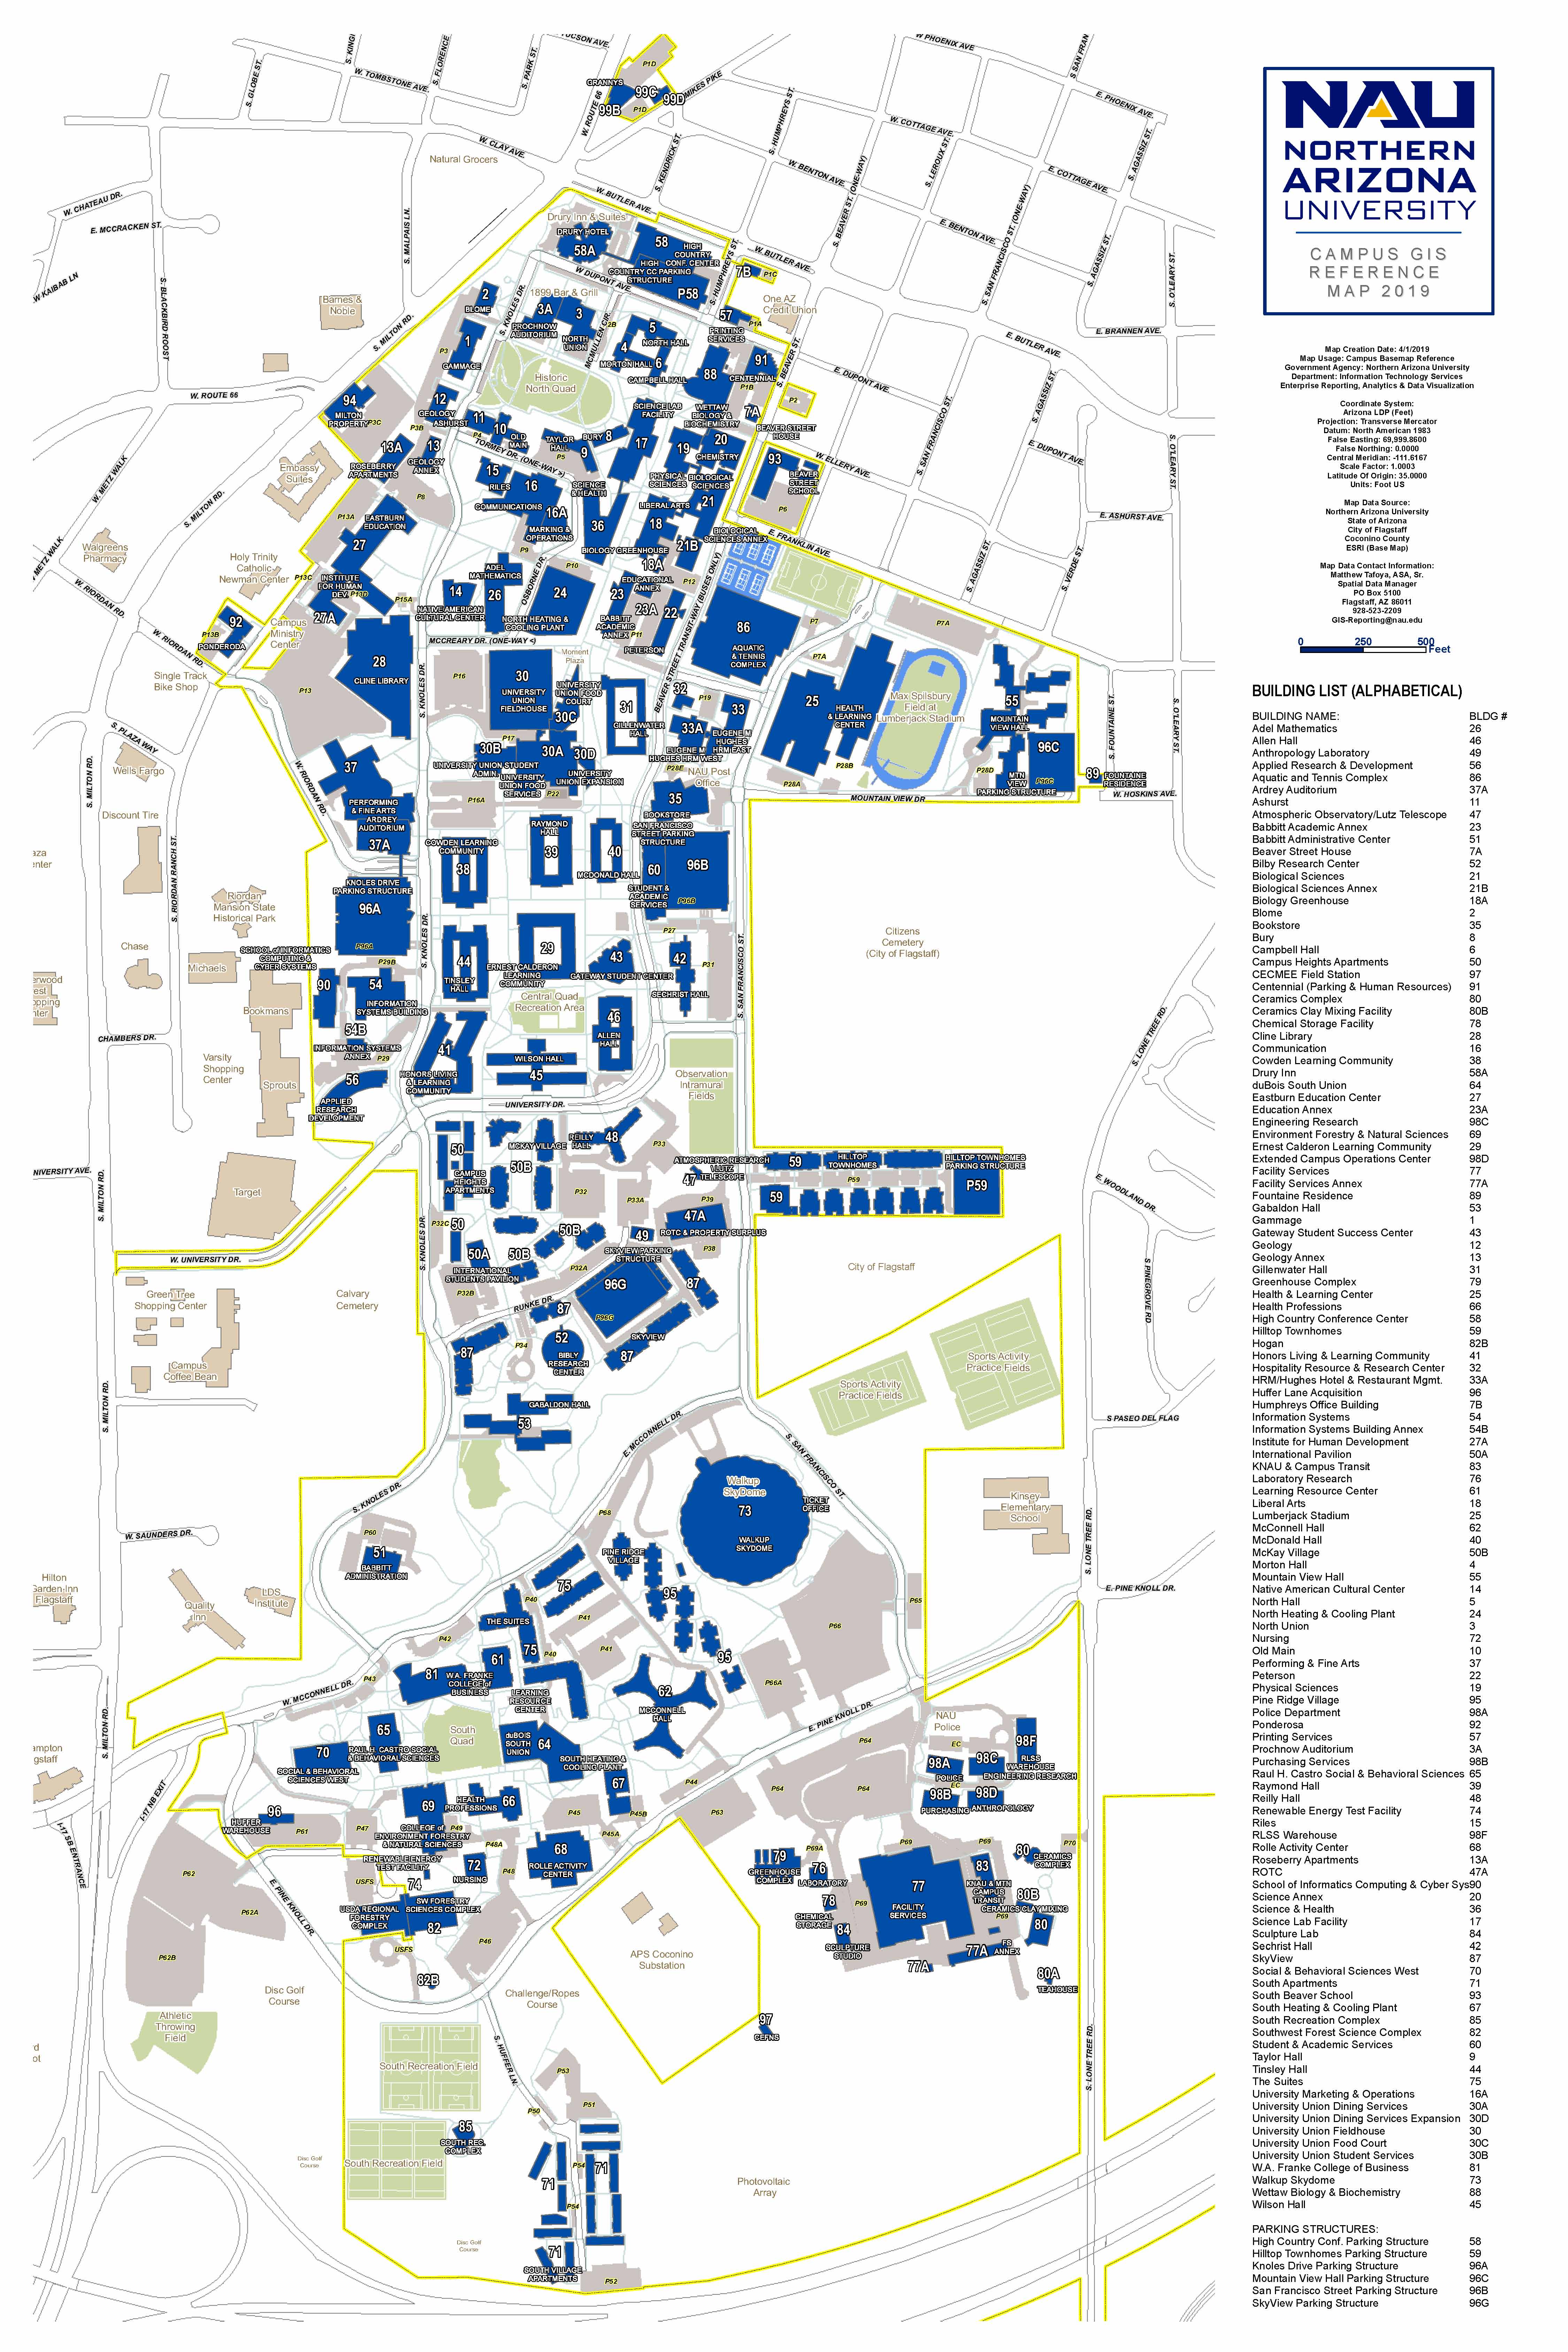 Northern Arizona University Campus Map GIS campus reference maps | Information Technology Services